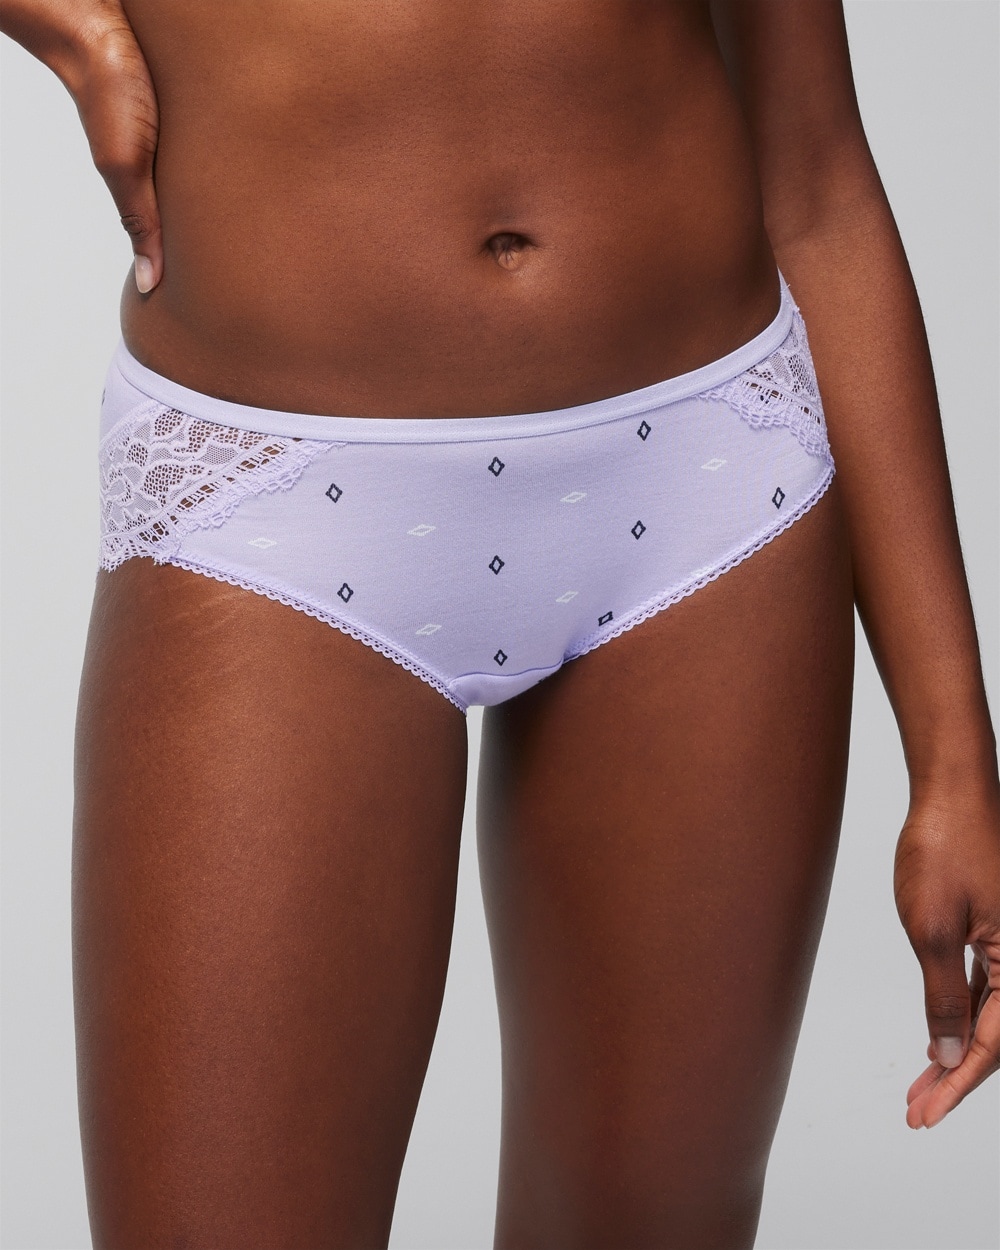 Soma Women's Embraceable Lace Hipster Underwear In Navy Size Xs |  In Shine Bright Lavender/nvy